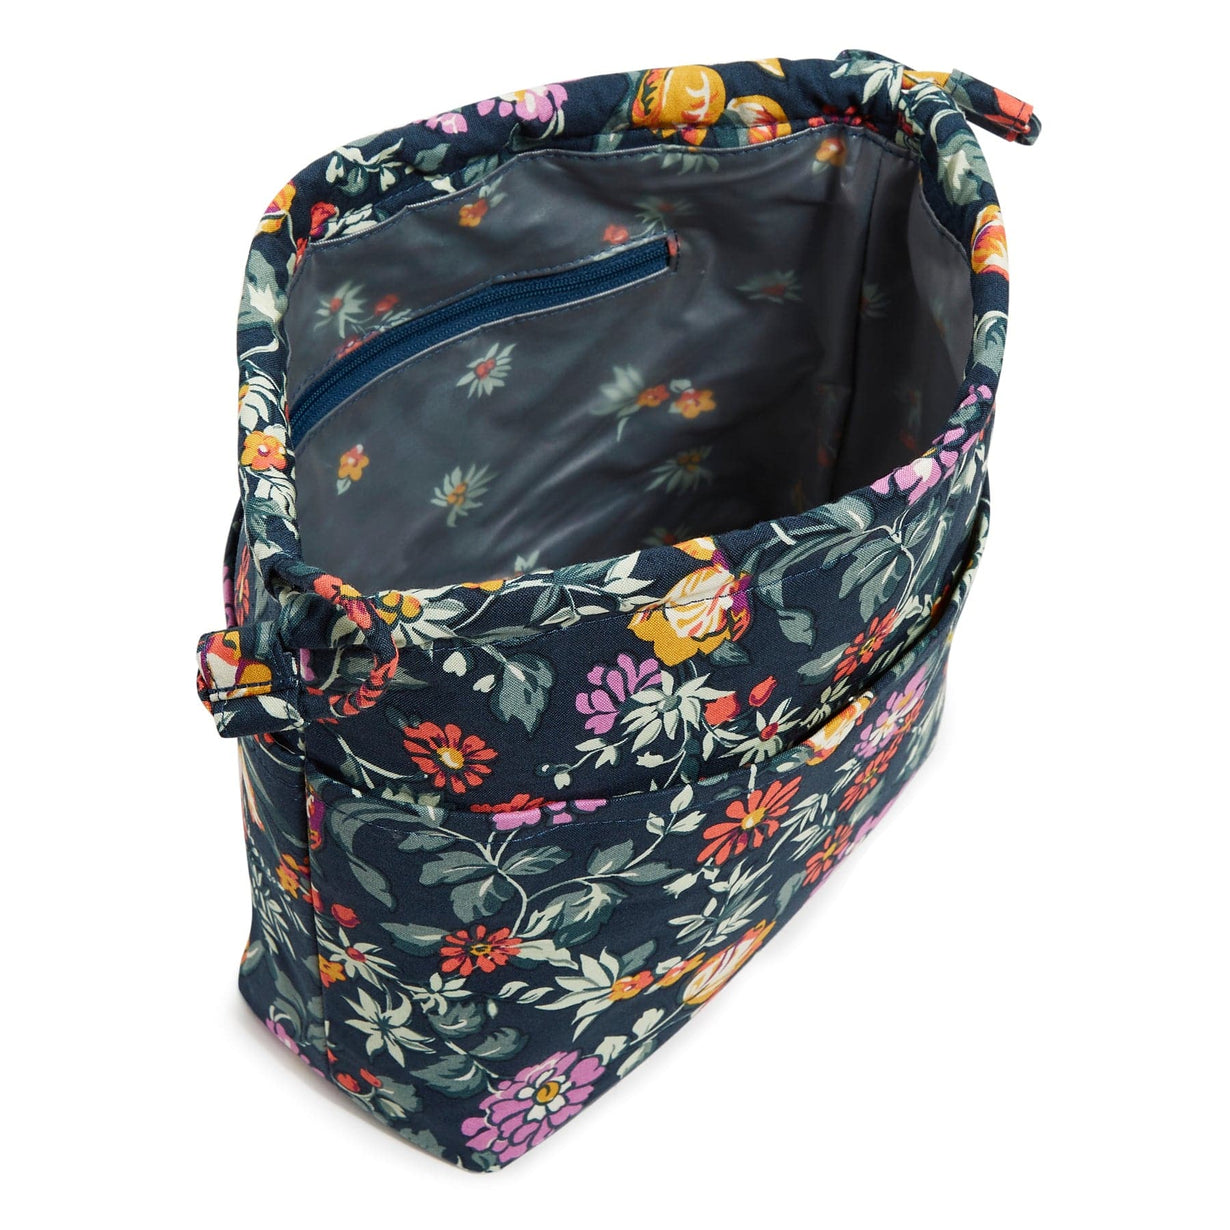 Ditty Bag - Casco Totes